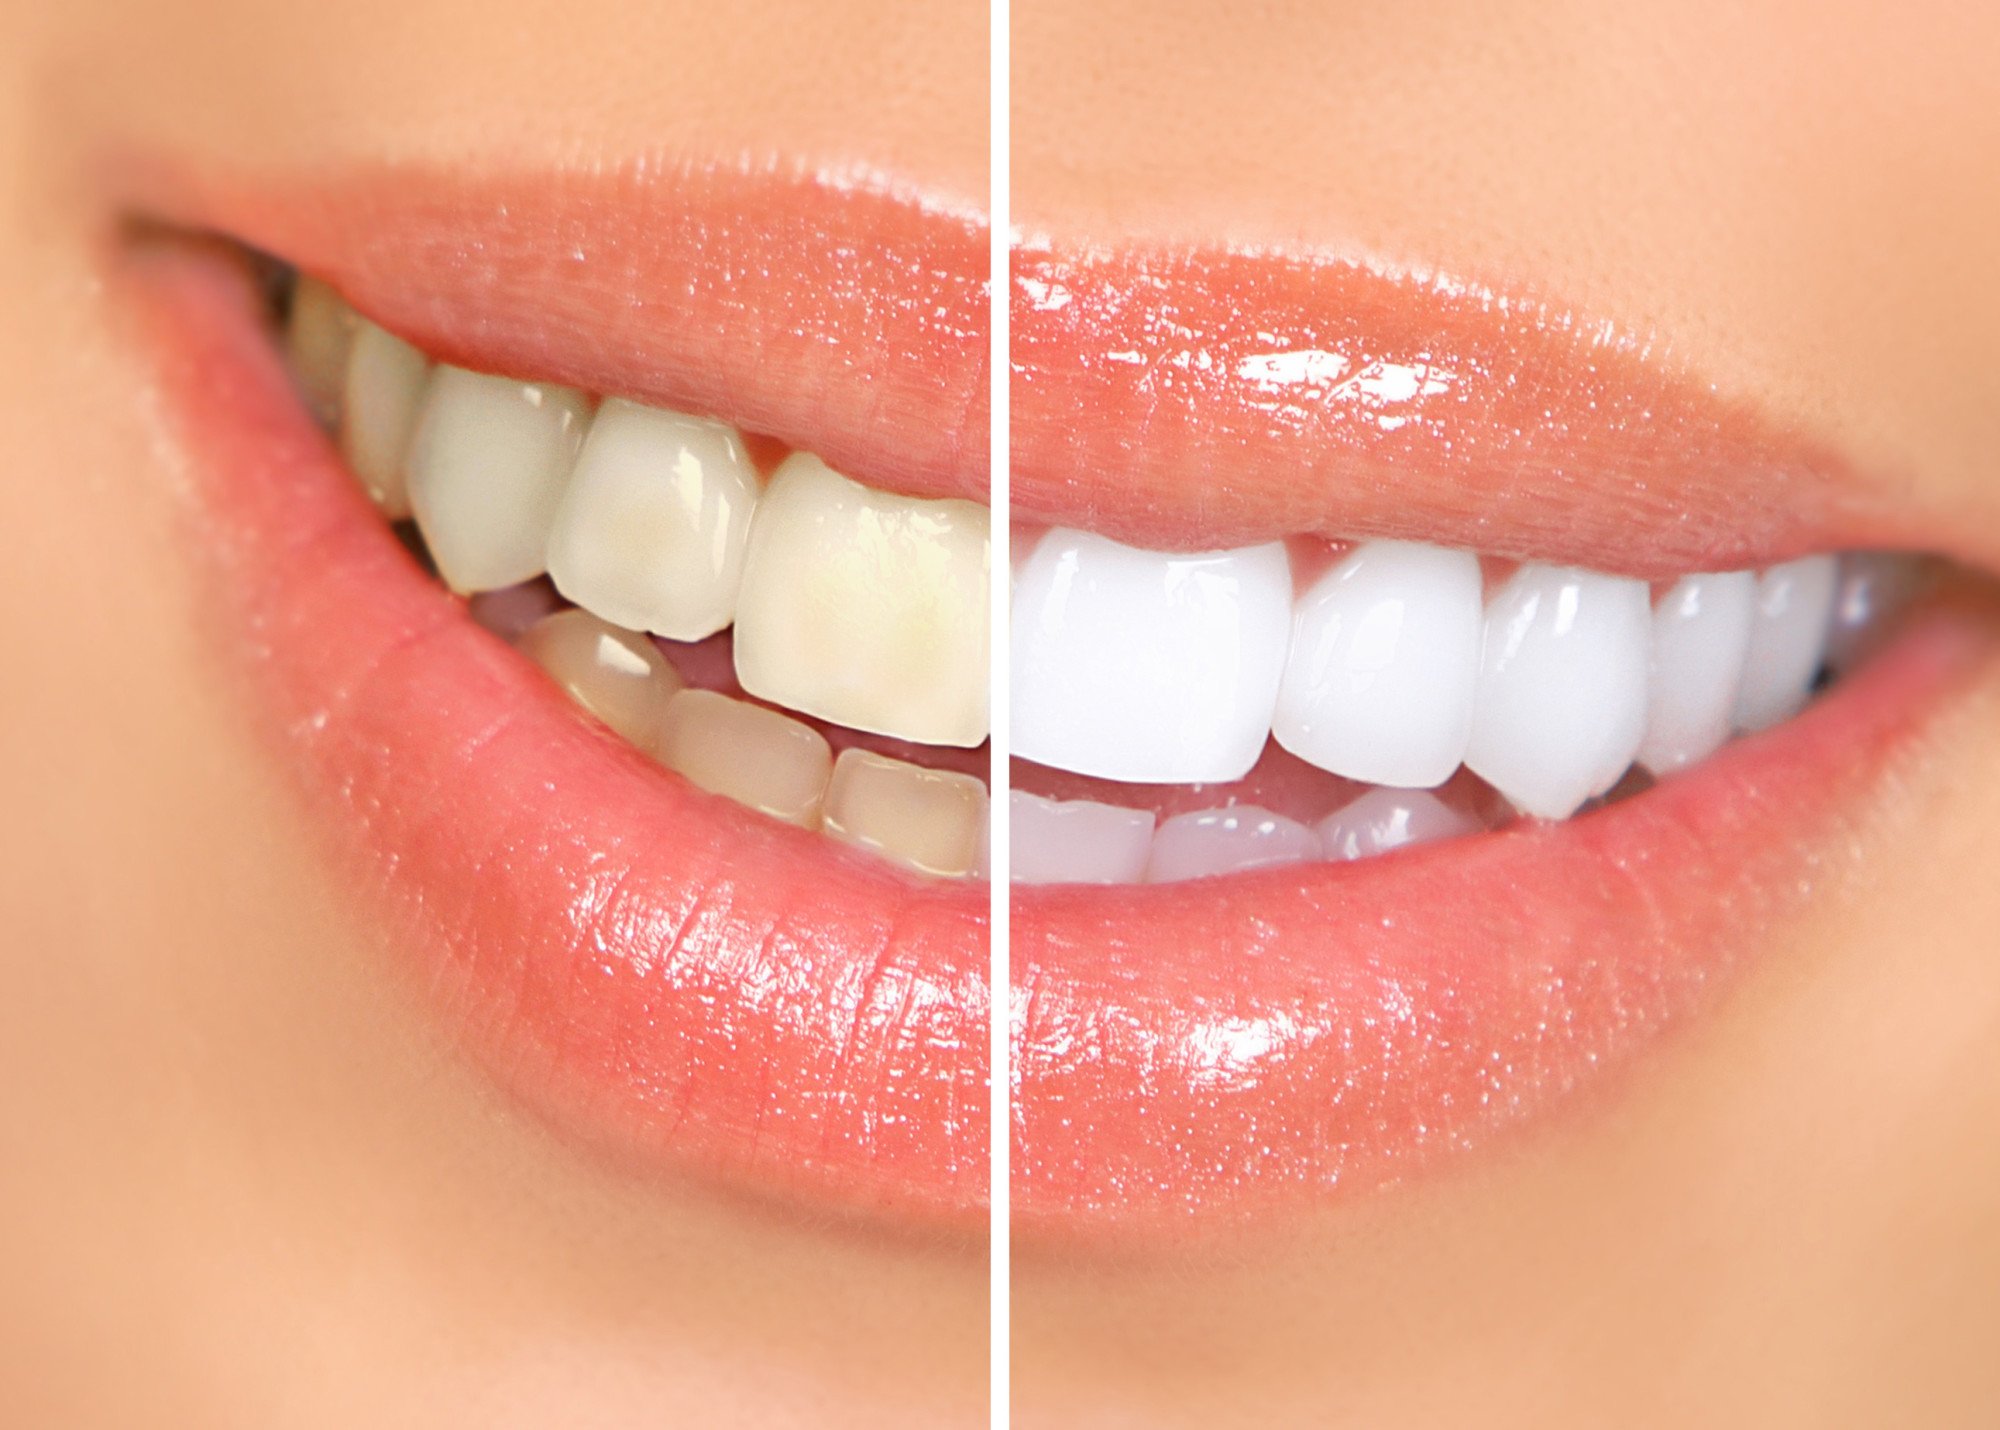 Reclaim Your Smile: How to Win the Battle Against Teeth Stains